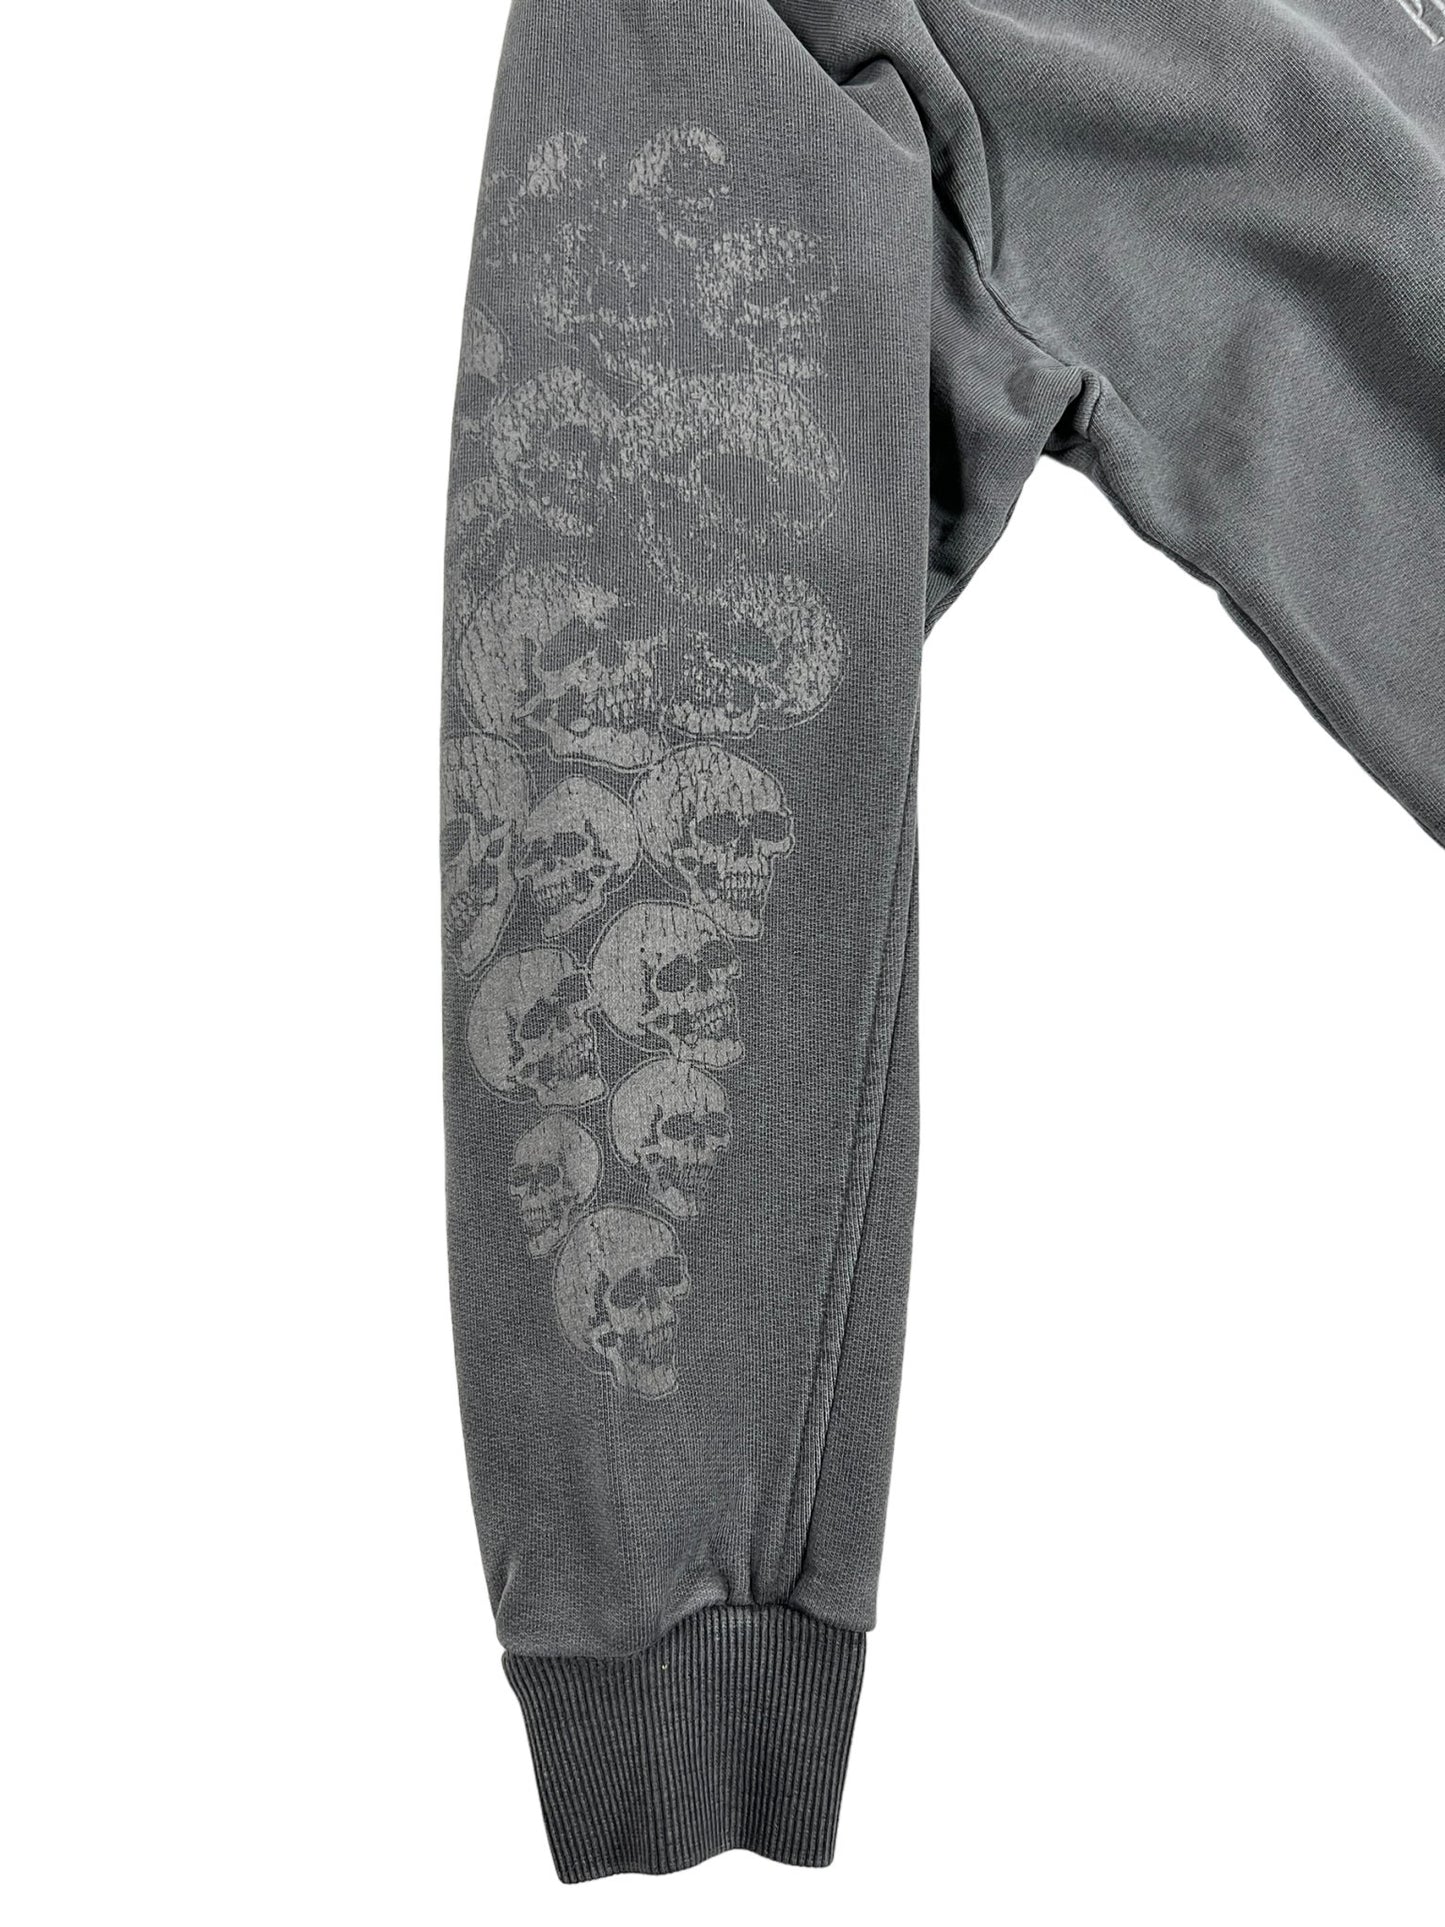 A grey cotton sweatshirt with embroidered PLEASURES SKULL SPIRAL on it.